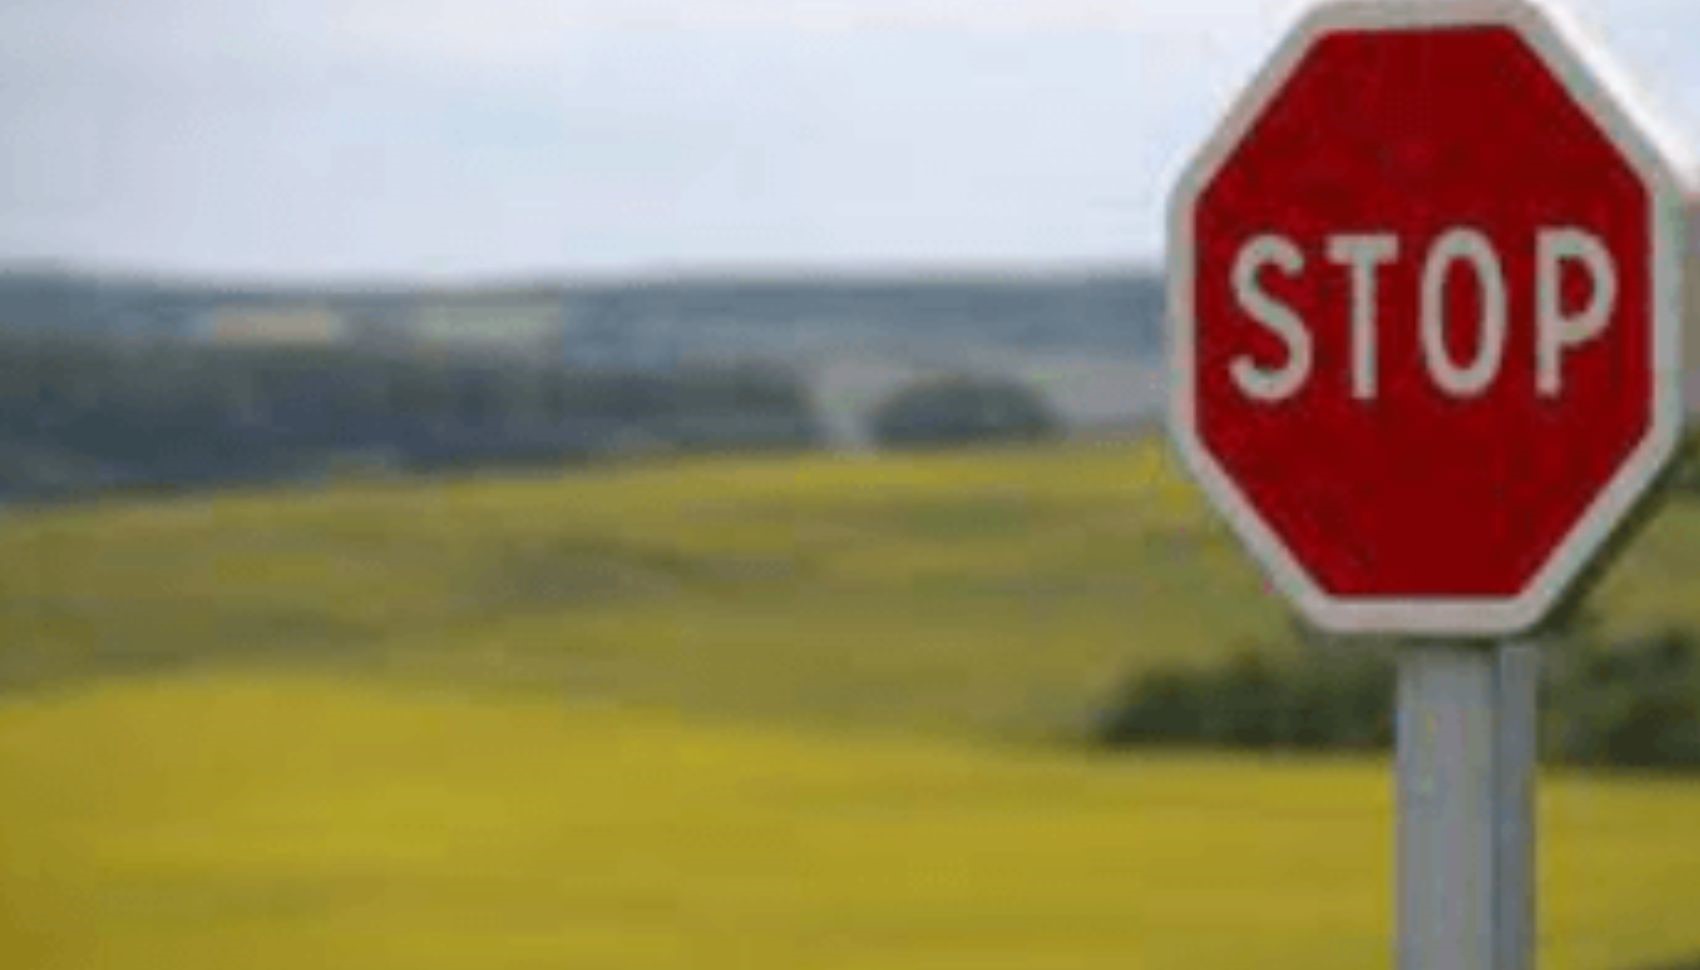 7 Proven Methods to Fight Stop Sign Tickets